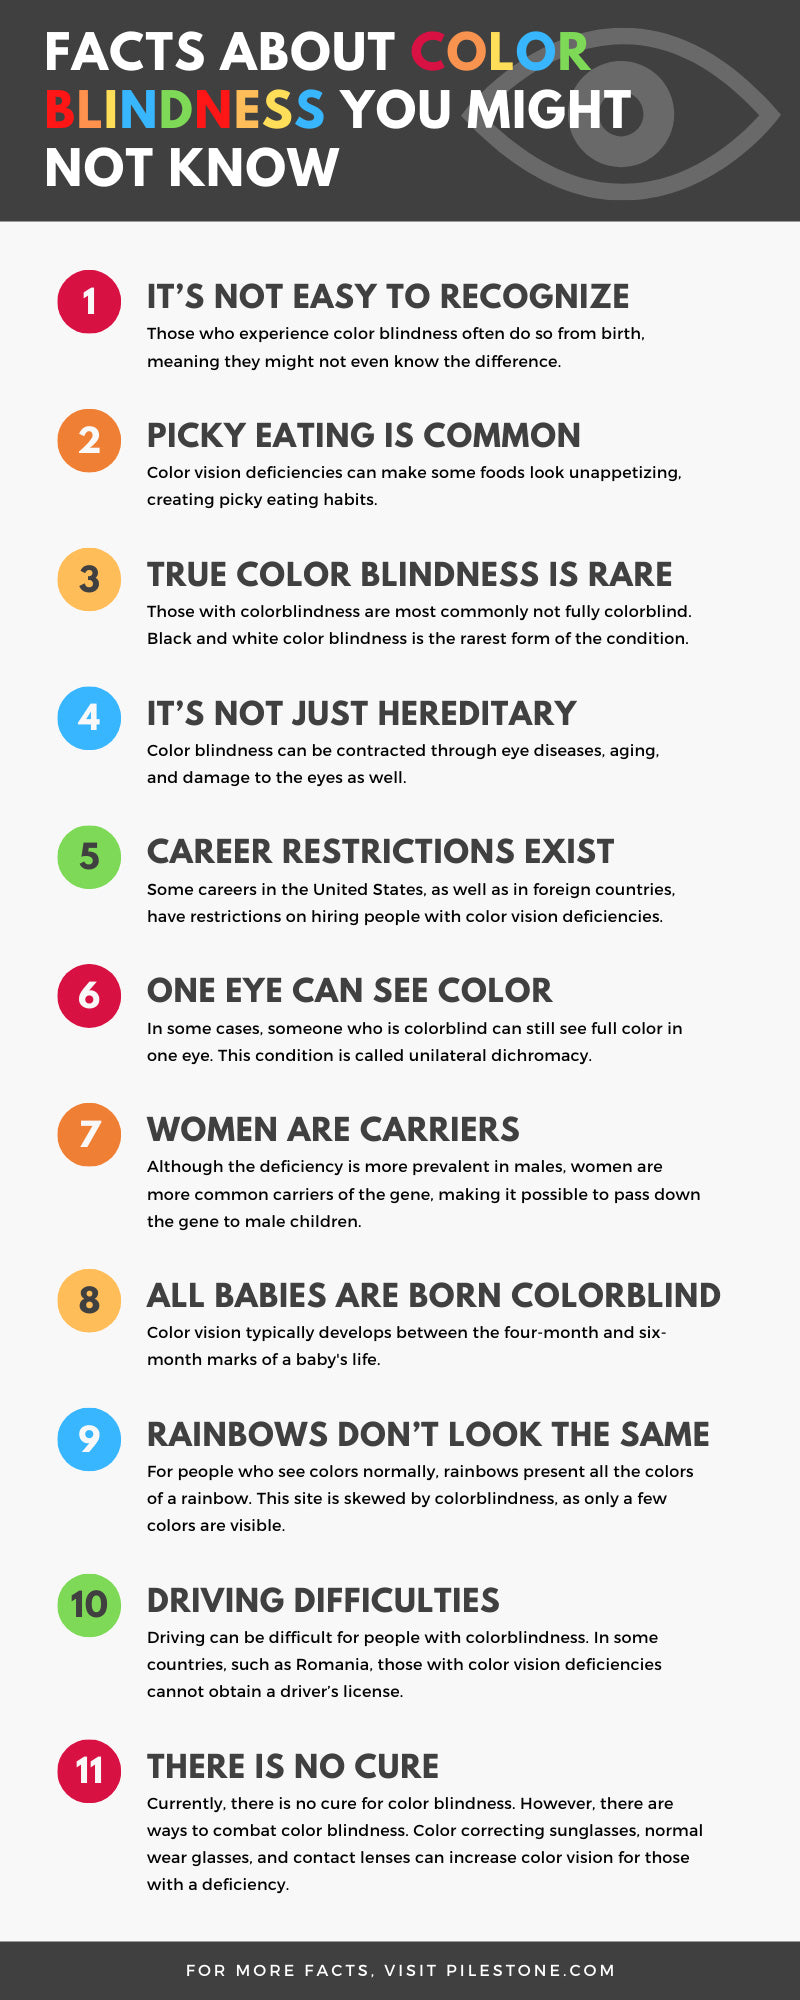 Facts About Color Blindness You Might Not Know Infographic